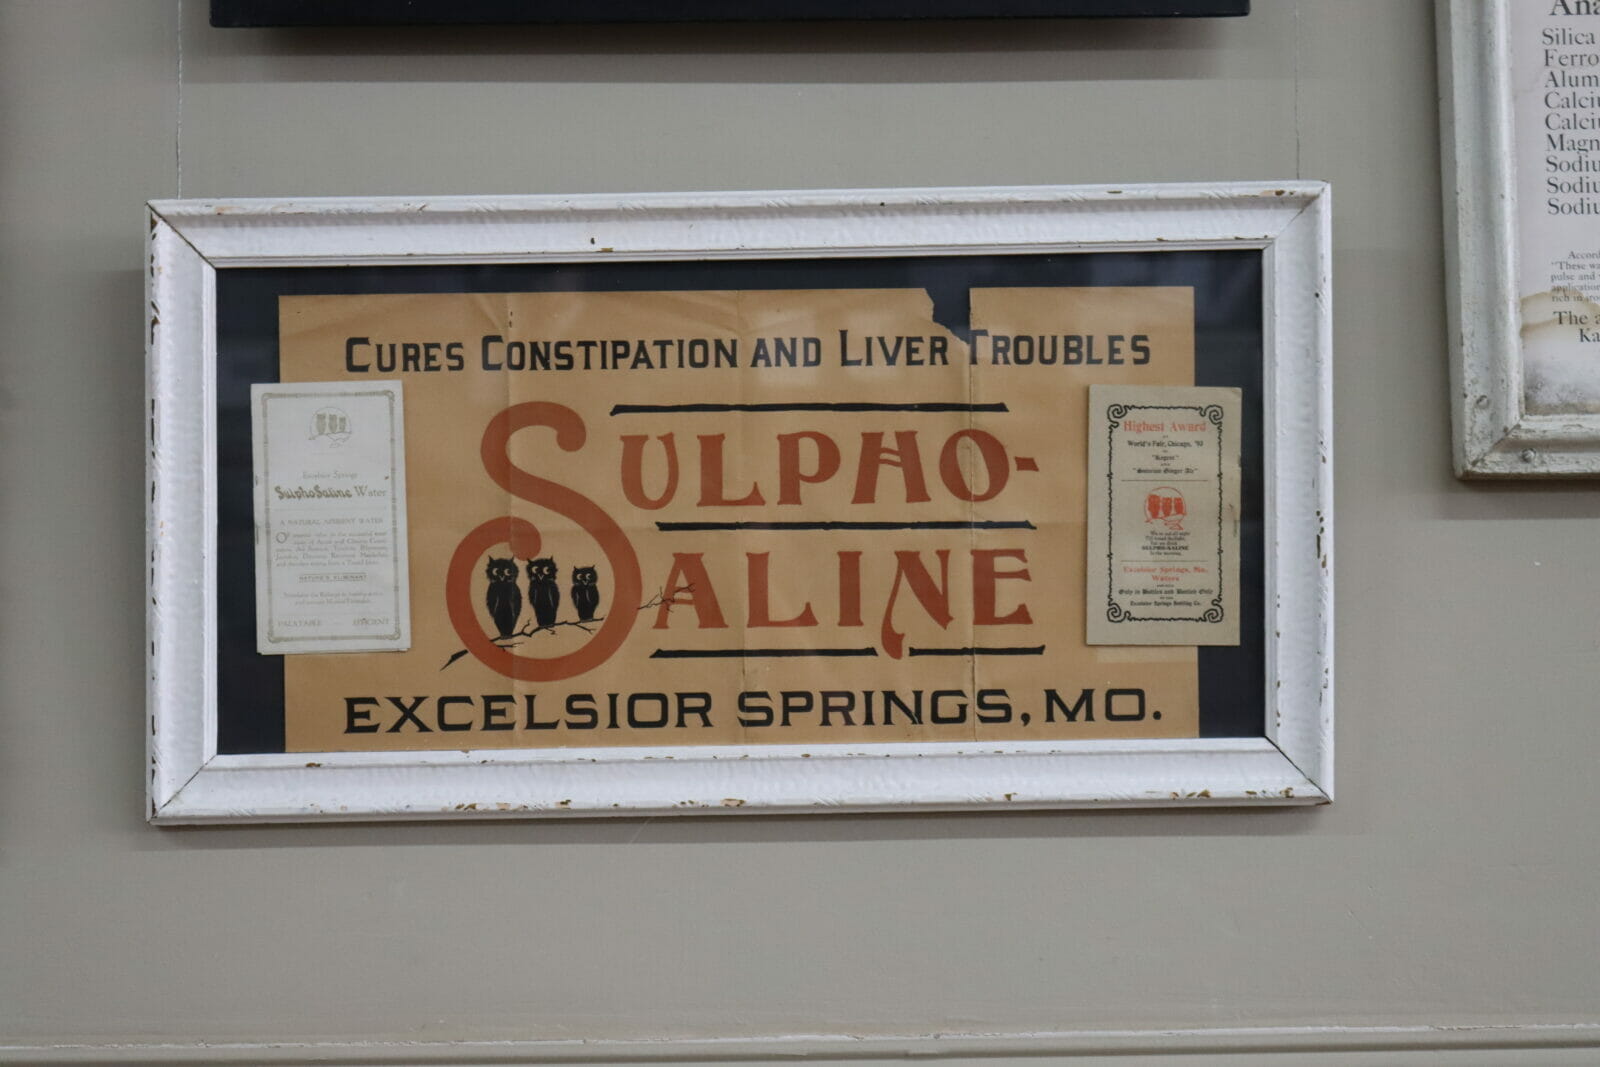 an old framed poster reads "Cures constipation and liver troubles. Sulpho-Saline Excelsior Springs, MO"